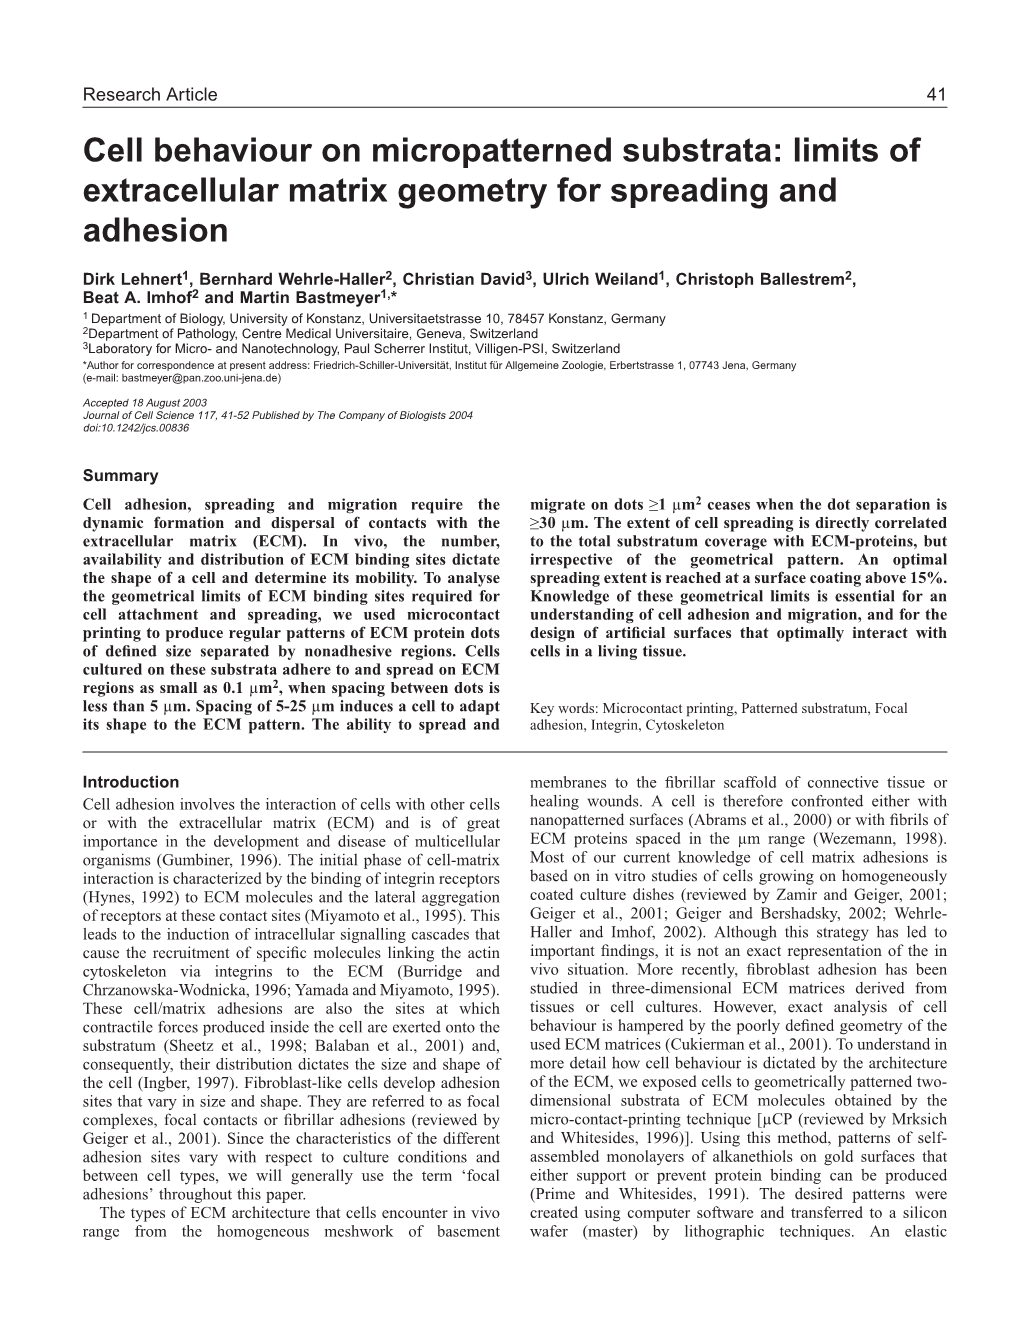 Limits of Extracellular Matrix Geometry for Spreading and Adhesion